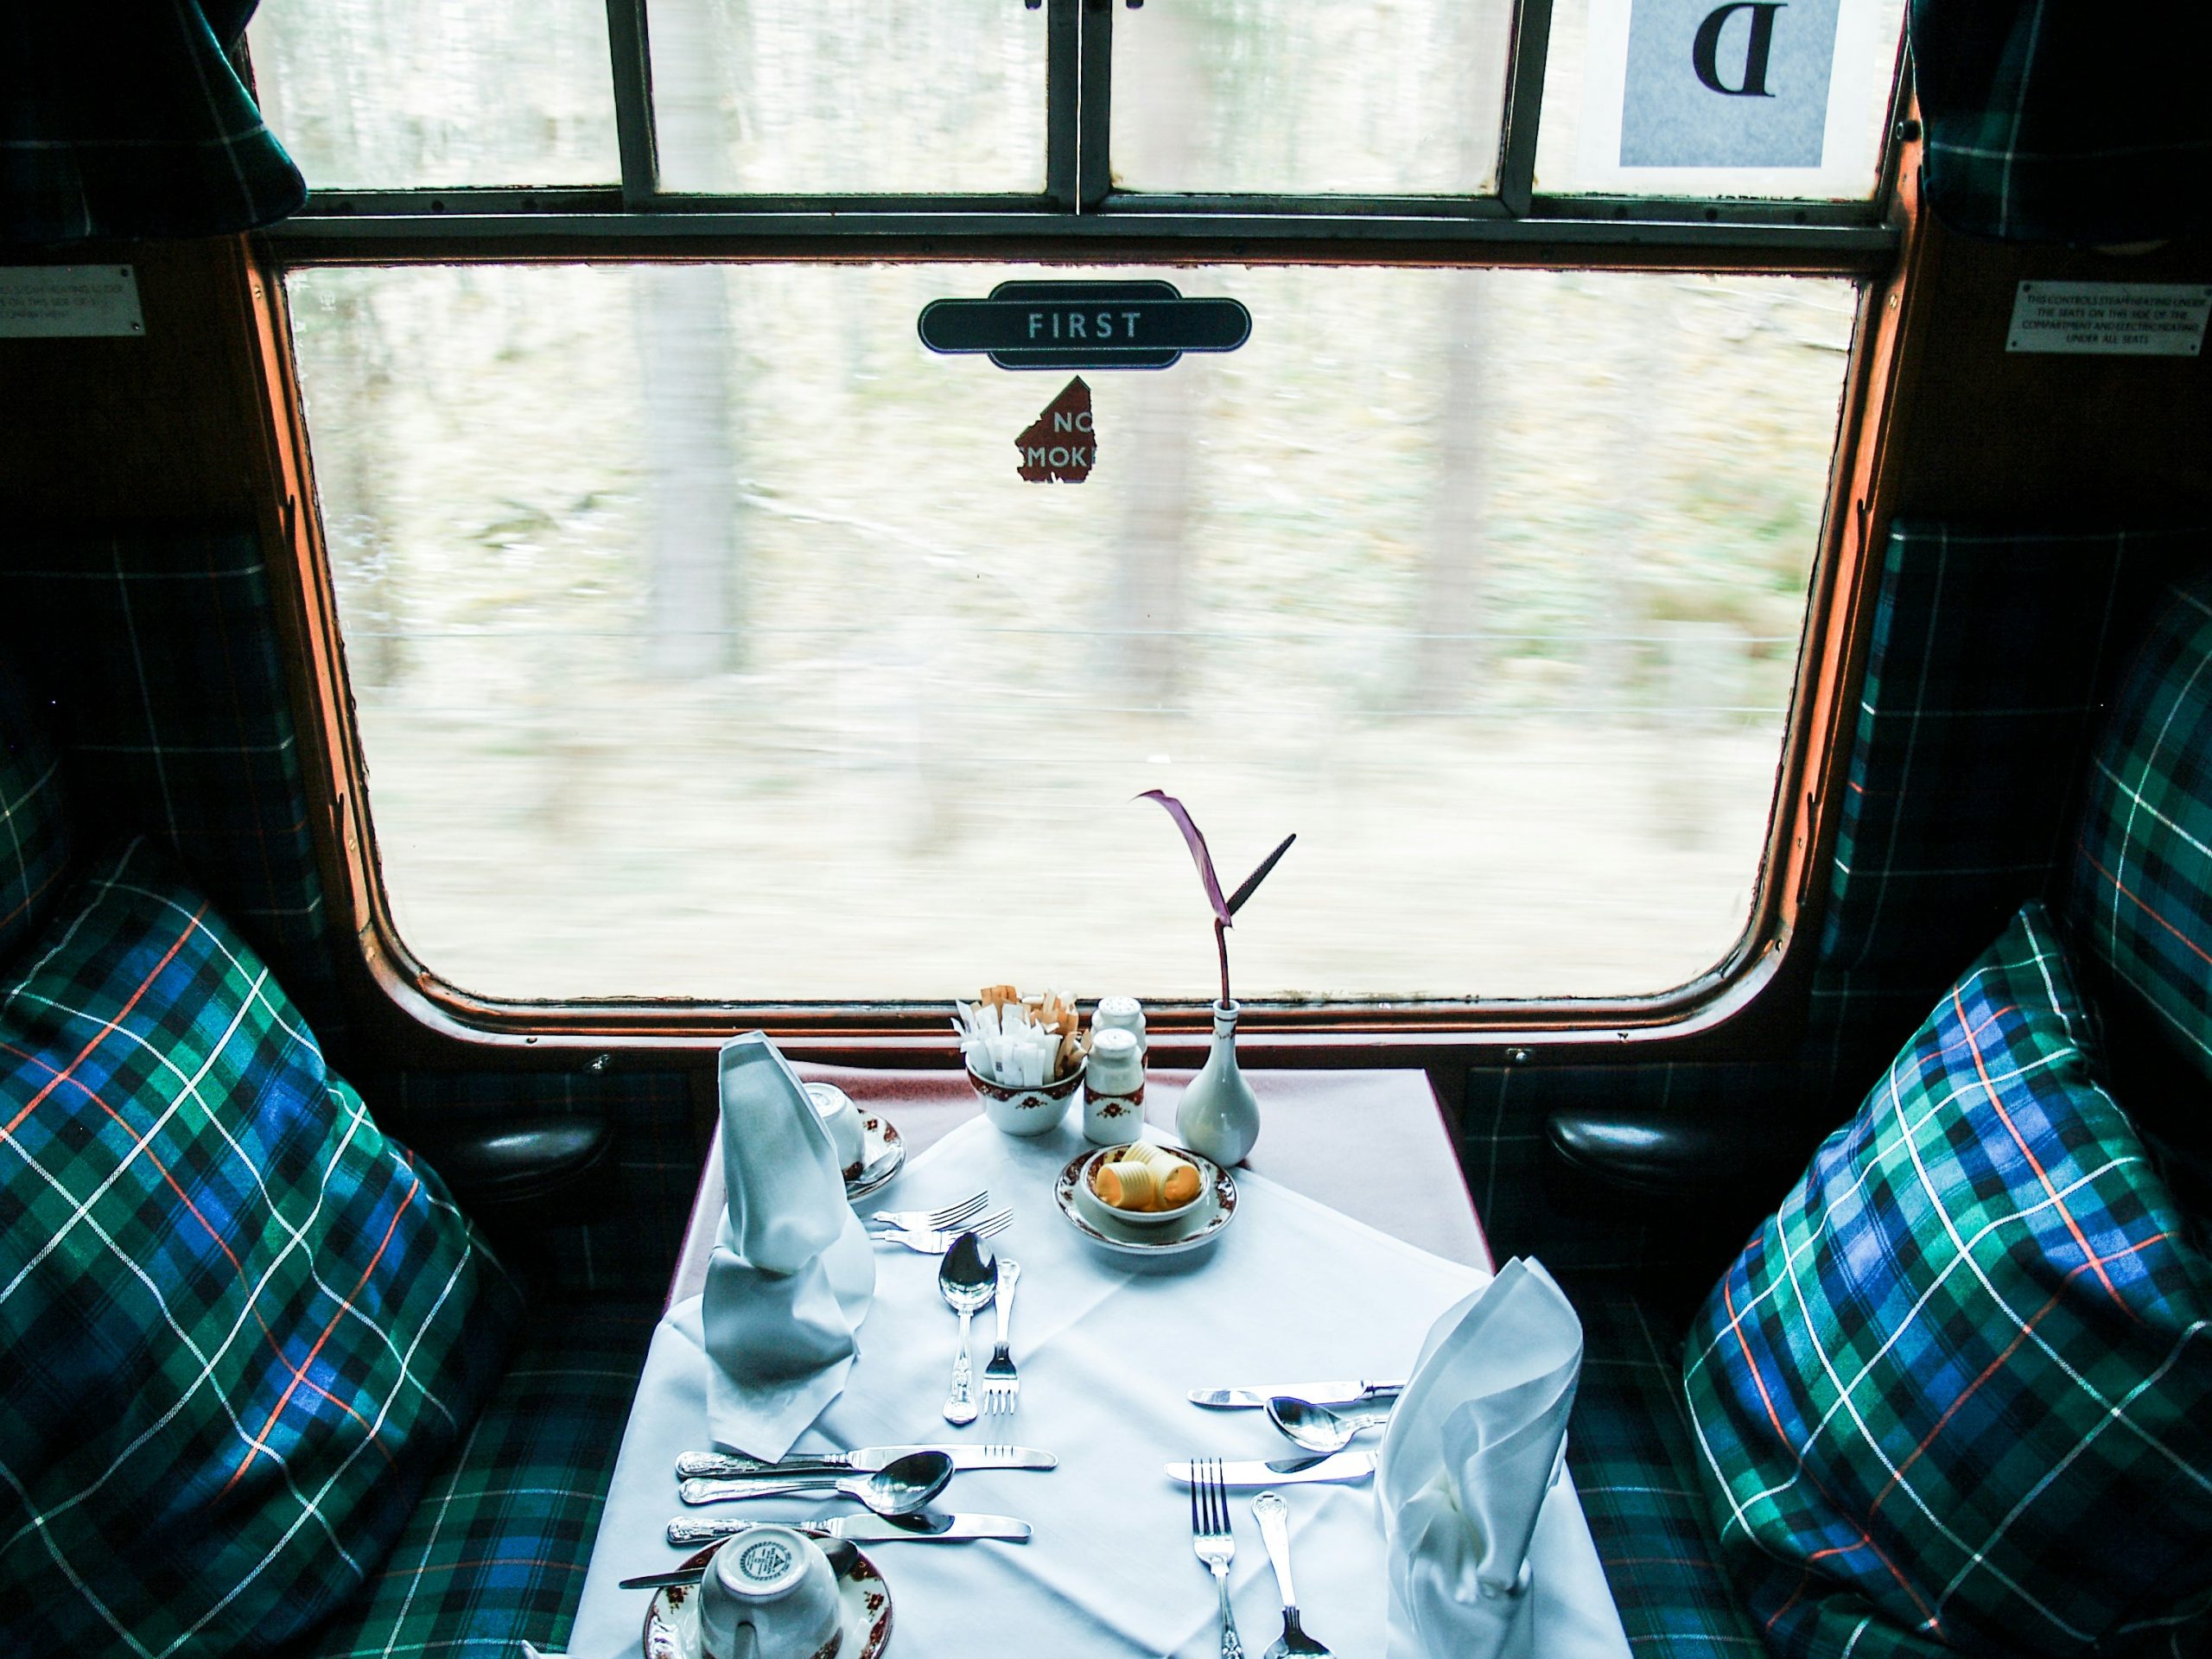 experience the epitome of luxury travel with our exclusive collection of luxury trains offering unparalleled comfort, exquisite cuisine, and breathtaking views.